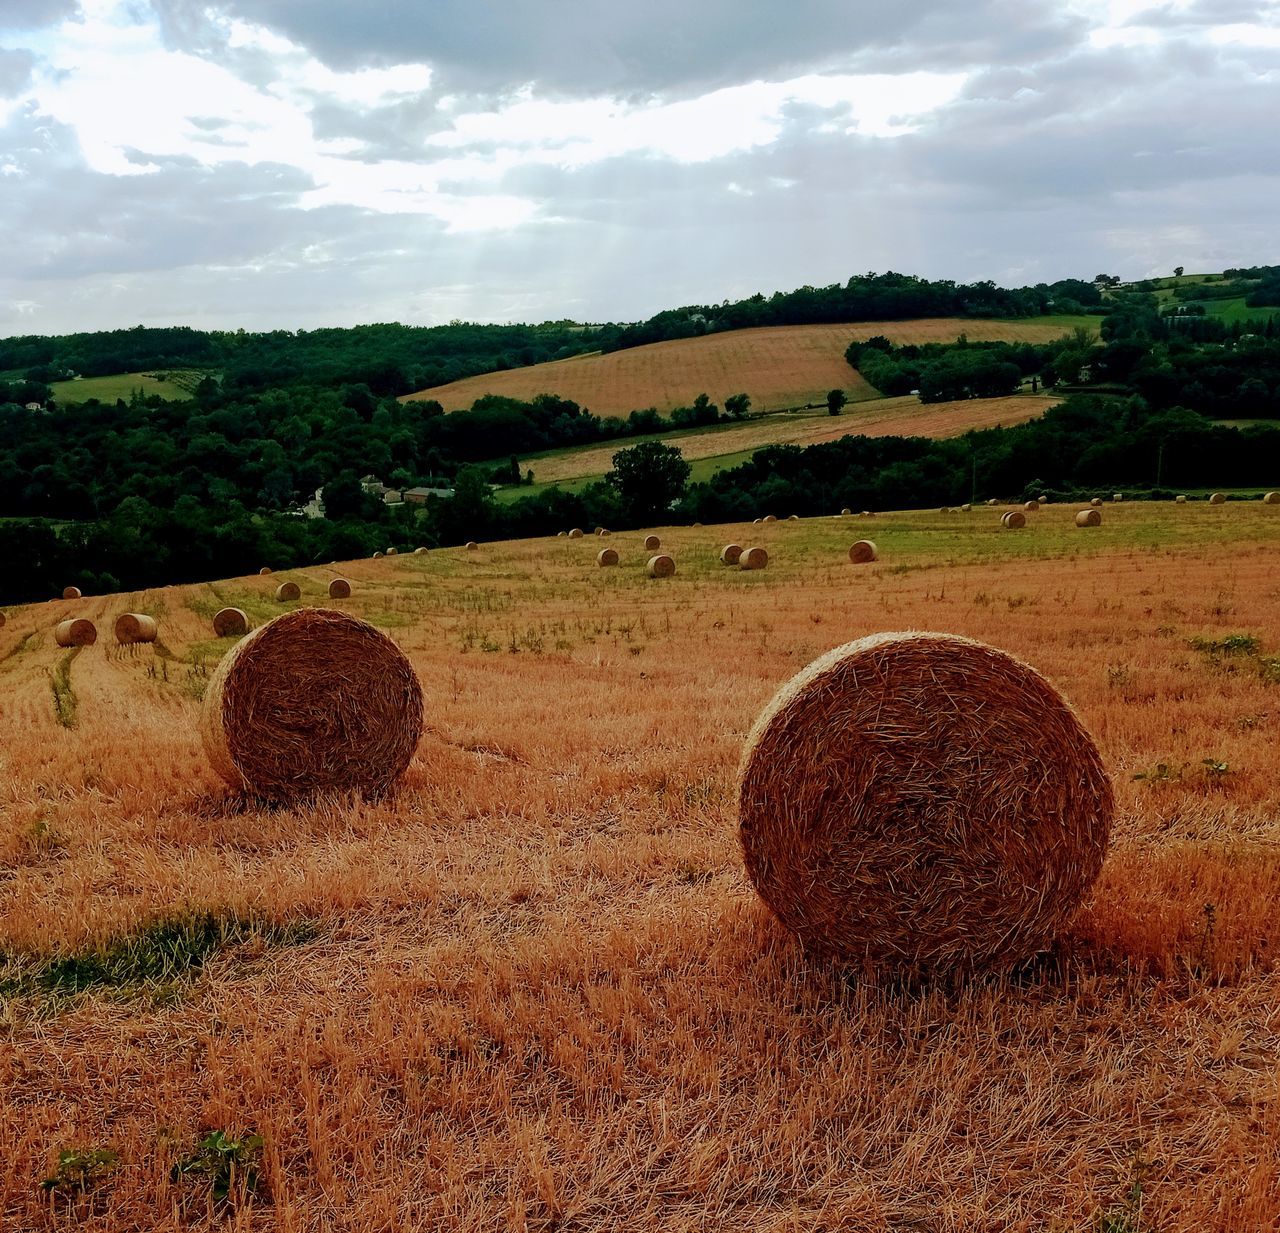 bale, hay, landscape, field, land, soil, plant, agriculture, environment, rural scene, sky, farm, nature, rural area, cloud, harvesting, rolled up, scenics - nature, prairie, straw, no people, circle, beauty in nature, tranquility, tranquil scene, tree, grass, haystack, plain, crop, grassland, geometric shape, hill, harvest, day, pasture, outdoors, shape, cereal plant